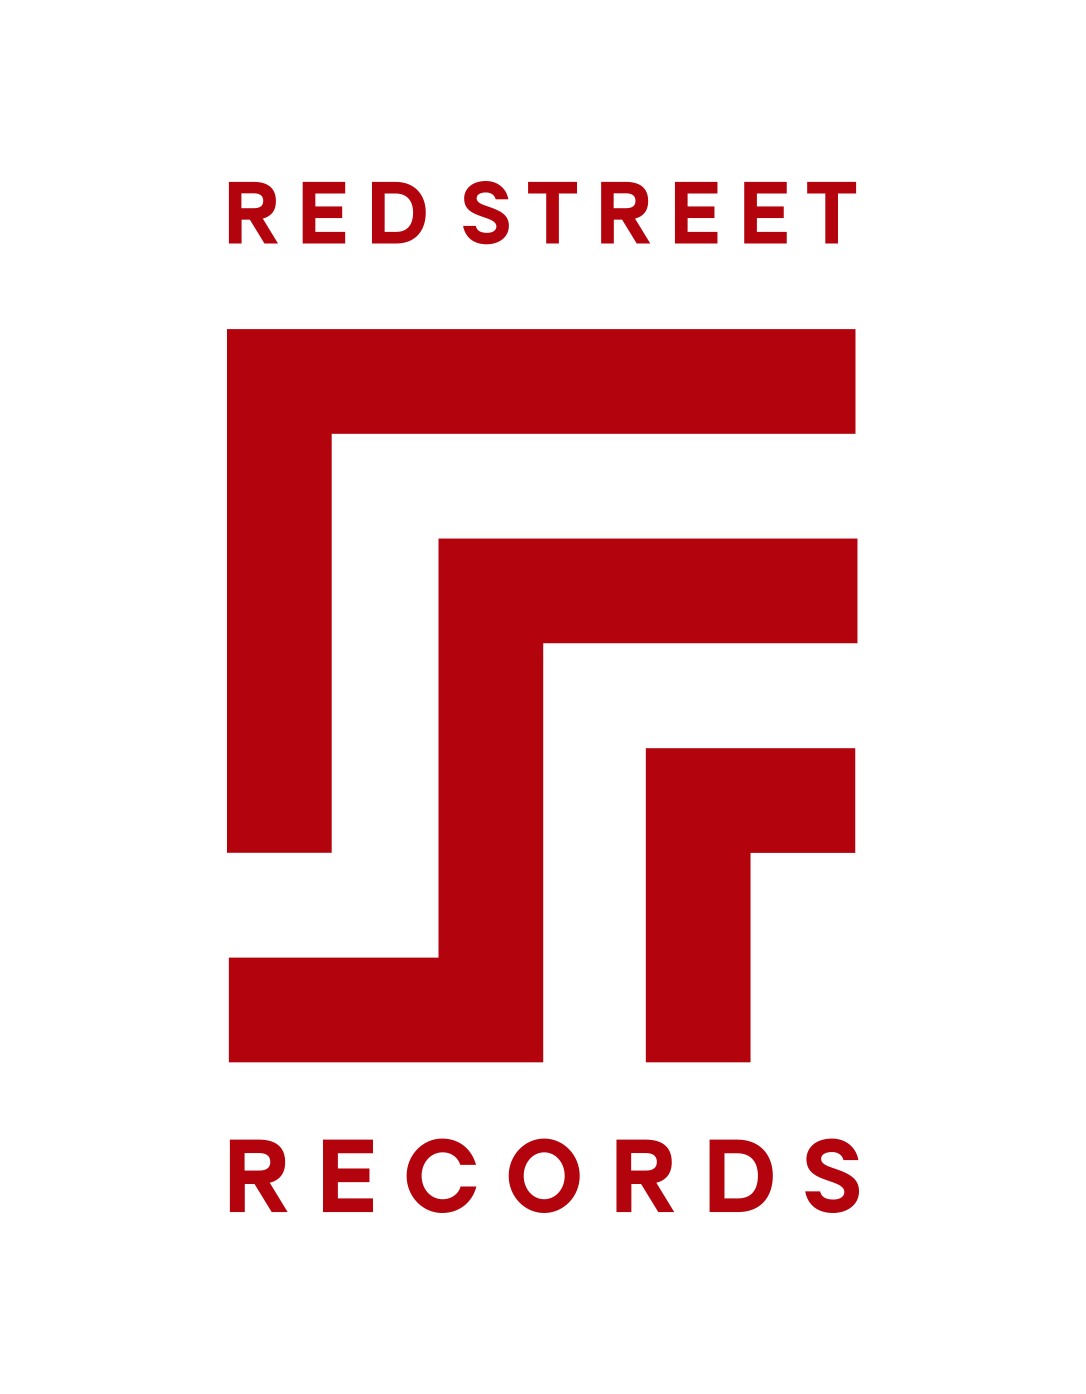 Red Street Recordslogo.png